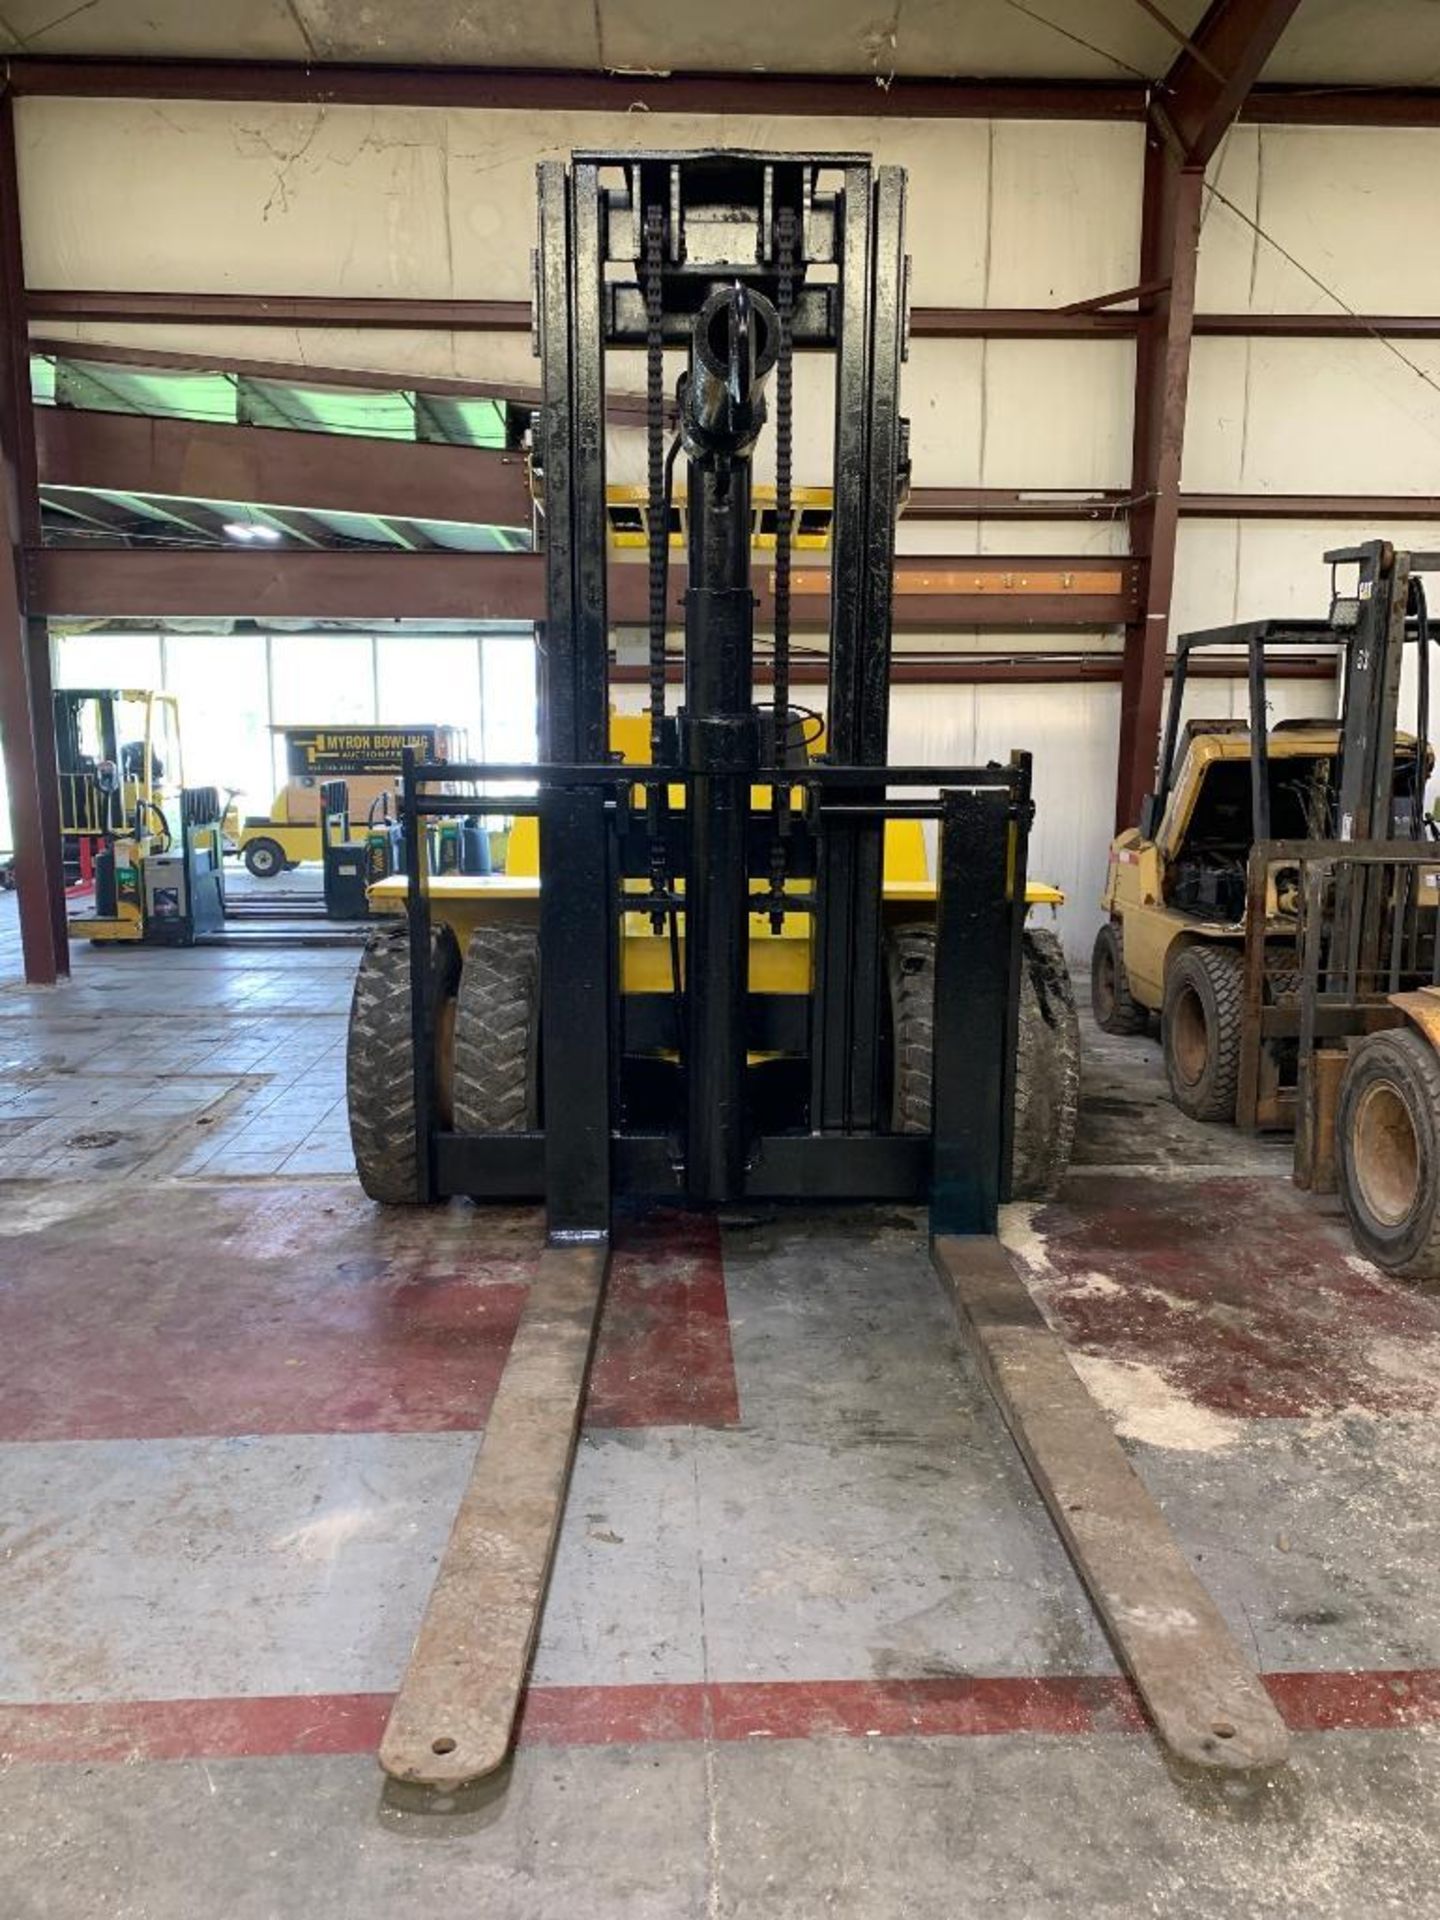 Hyster 30,000 lb. capacity forklift, model h300, s/n a19p1666k, gasoline, oil clutch, dual drive pne - Image 2 of 5